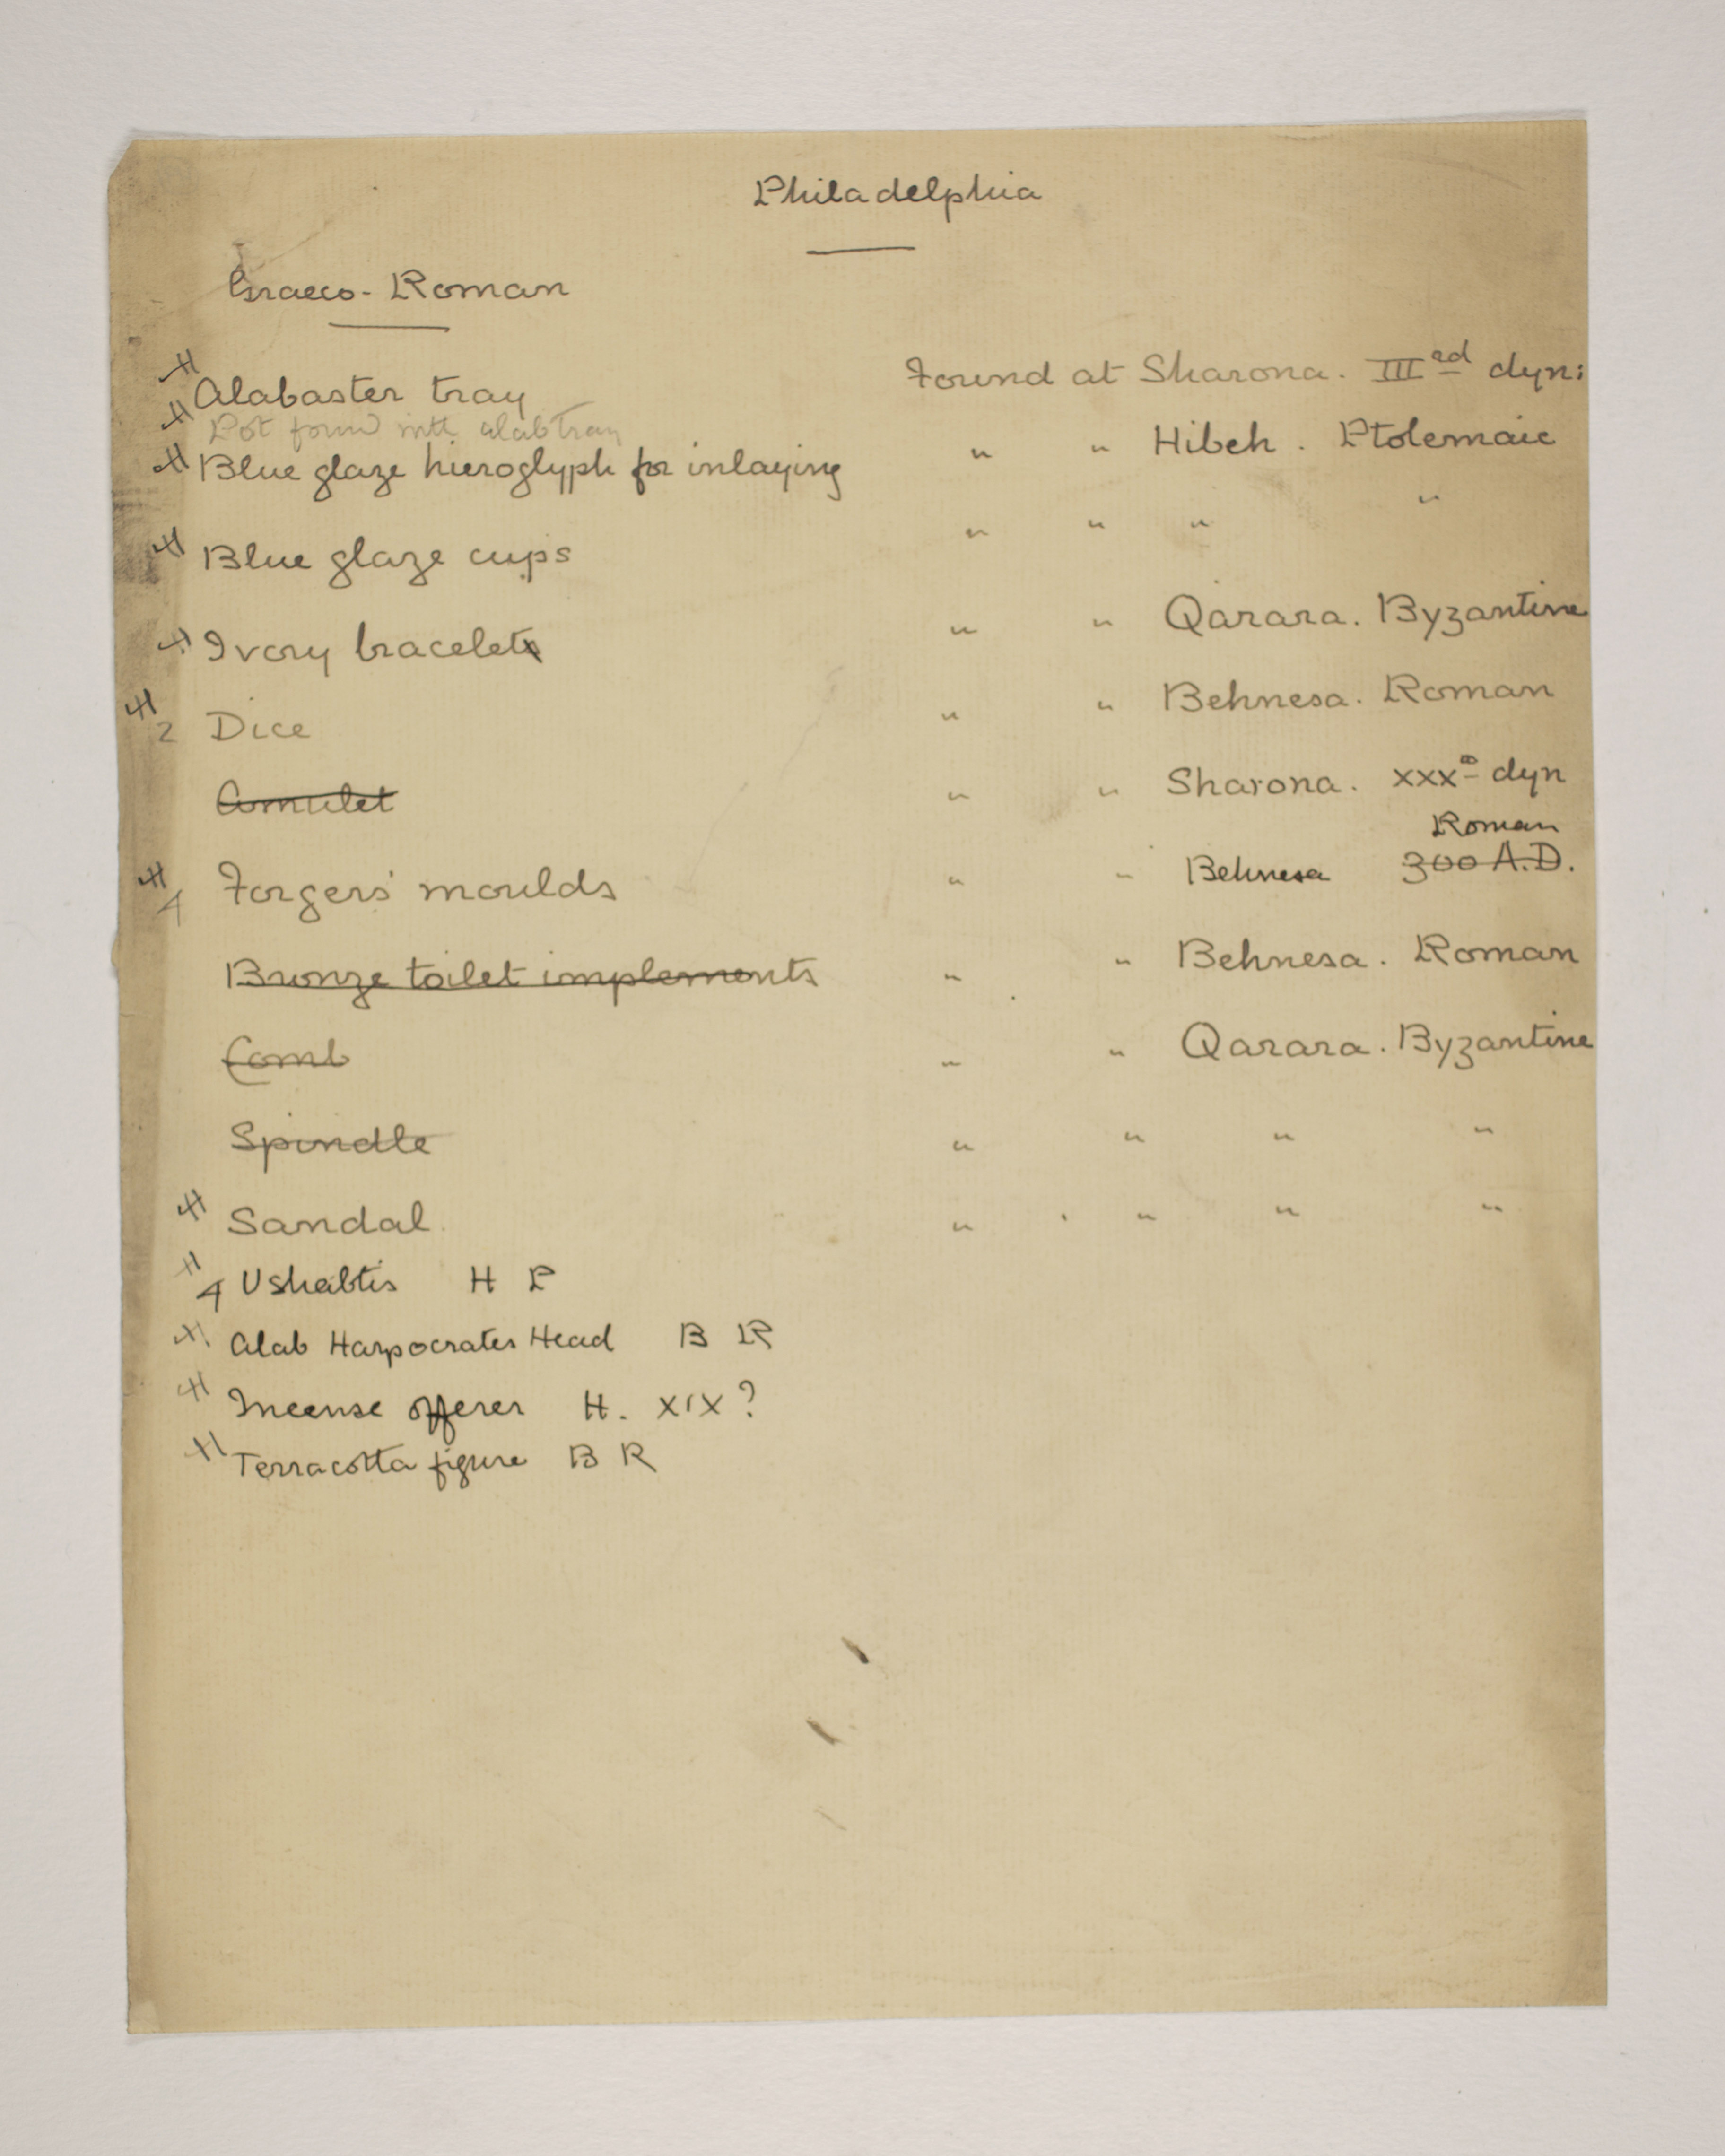 1902-03 Abydos Individual institution list  PMA/WFP1/D/11/49